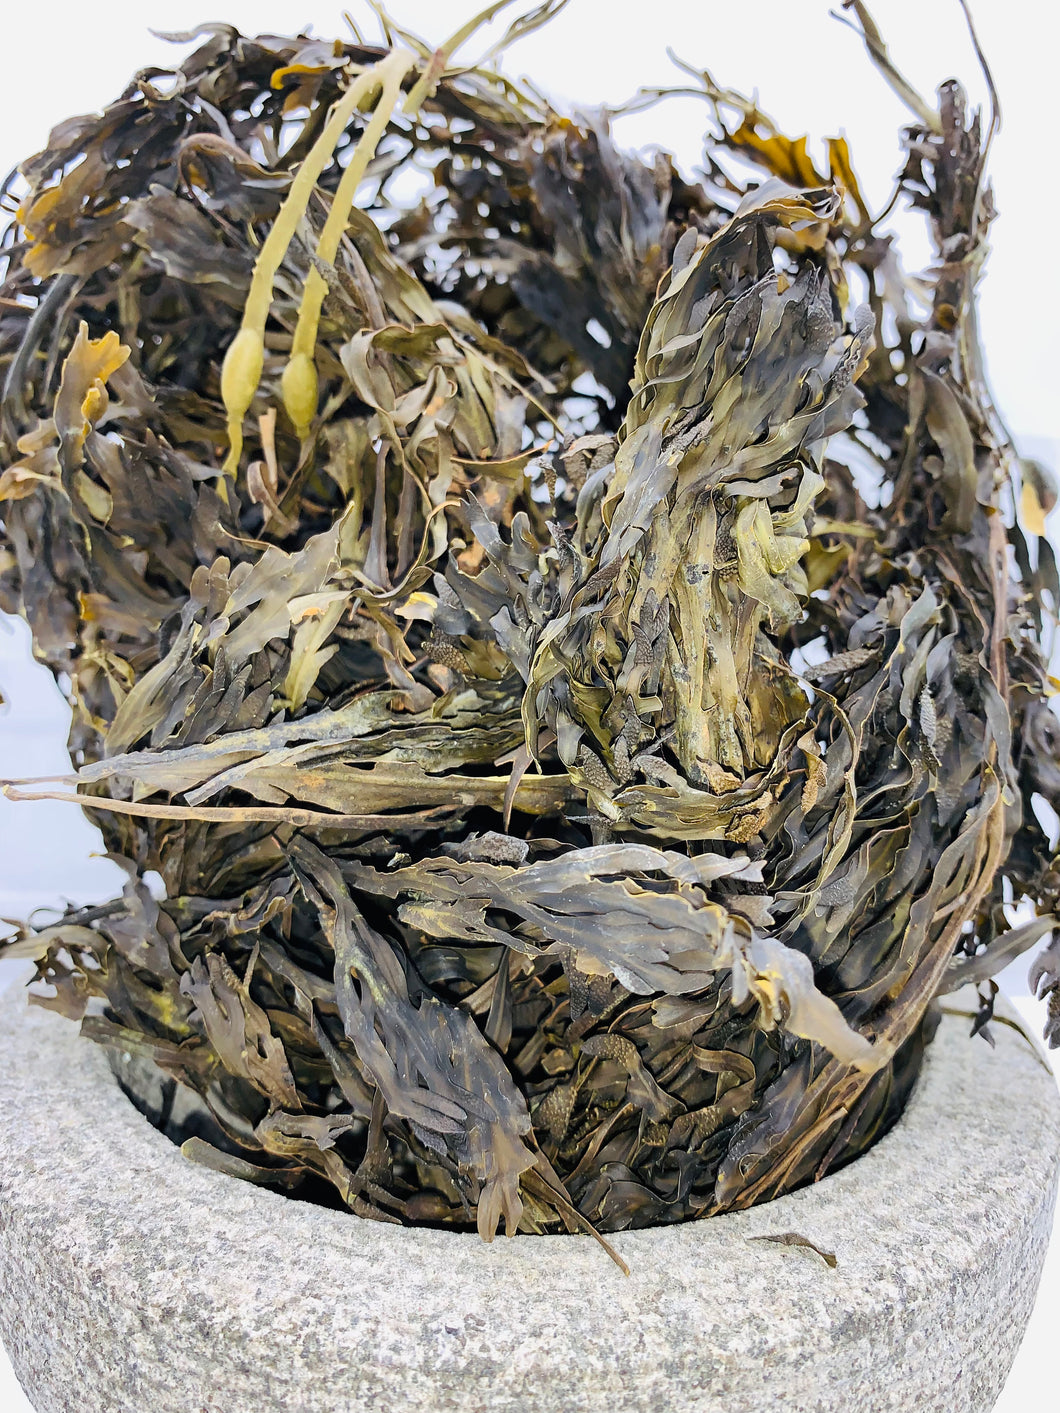 Wildcrafted whole leaf Bladderwrack (fucus vesiculosus) wildcrafted & harvested from the Atlantic ocean